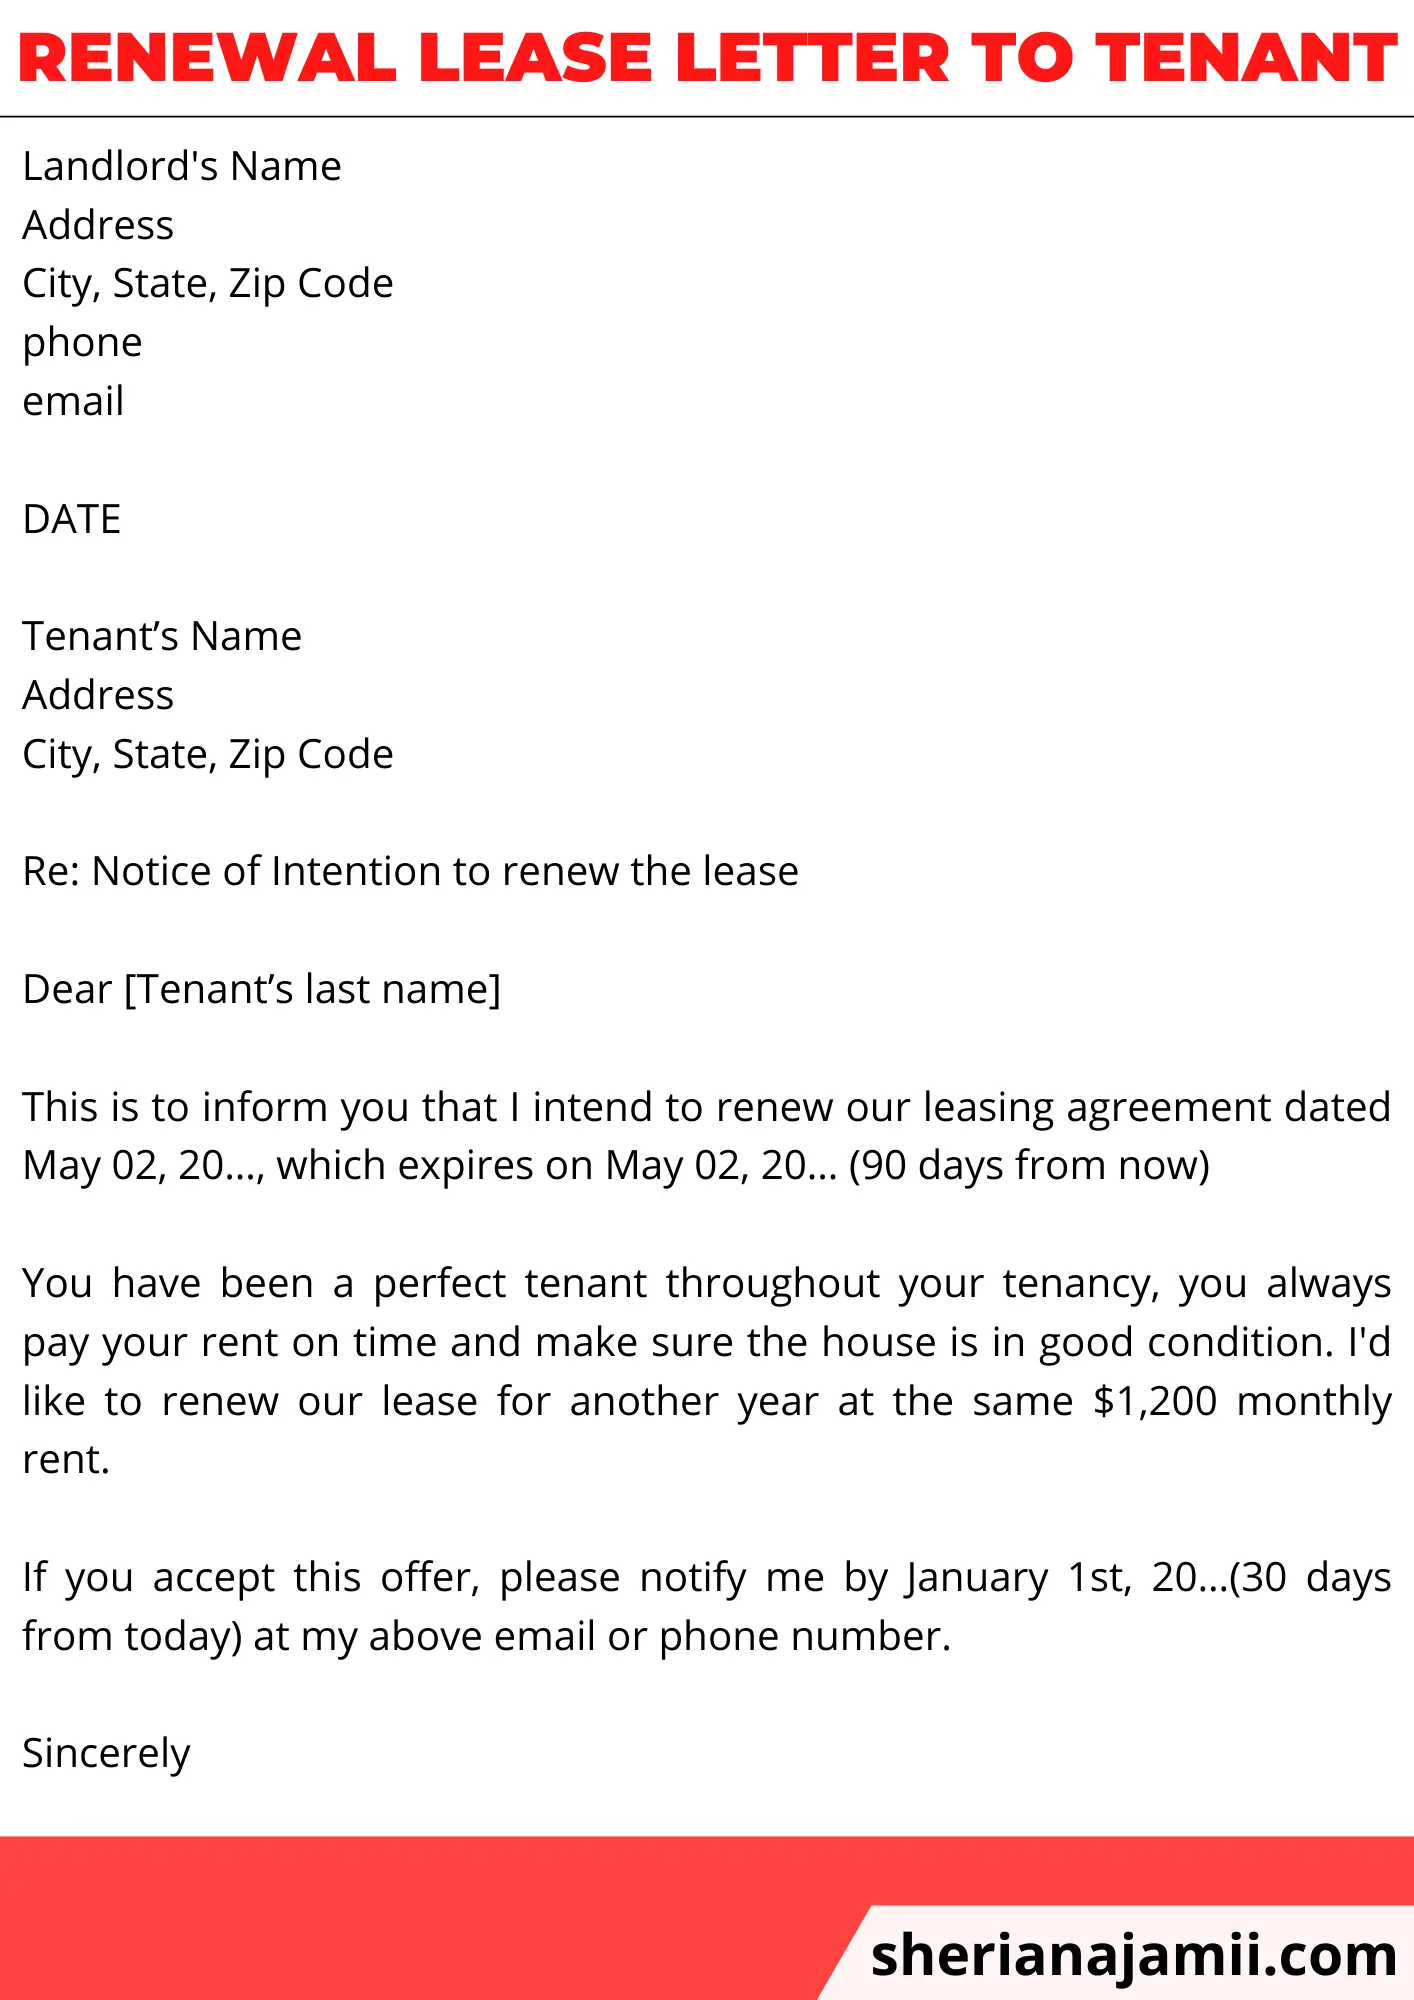 Renewal lease letter to tenant, Renewal lease letter to tenant sample